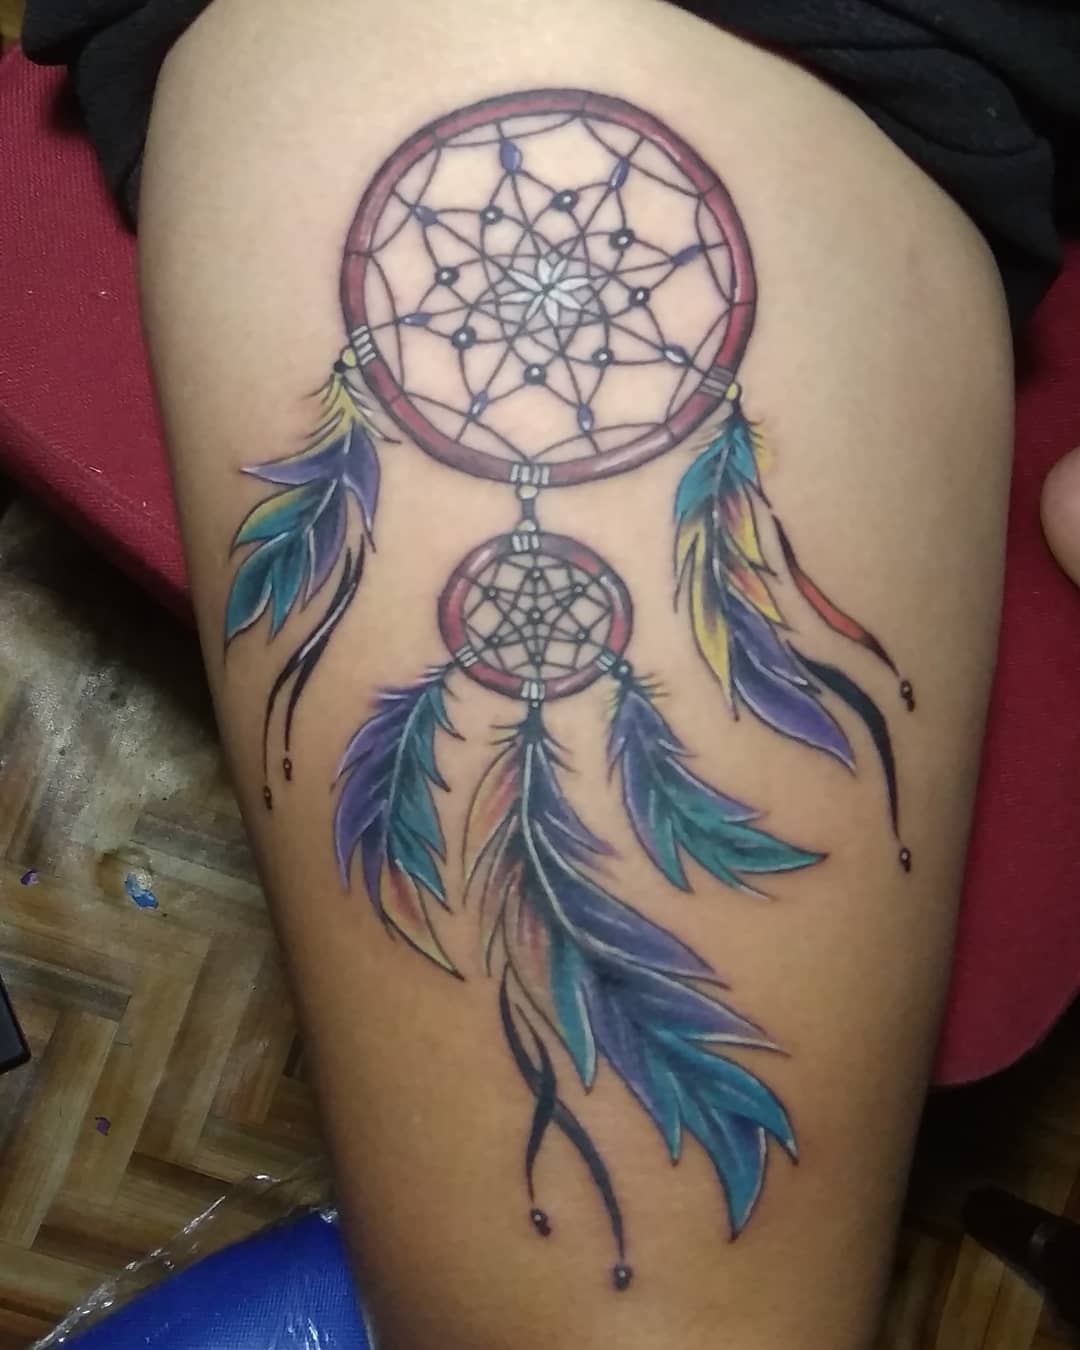 Brave tattoo lovers will adore this dream catcher tattoo! All you need to do is being ready to have your upper leg cover up. This big size and gorgeous dream catcher is ready to make you feel adorable with its colorful feathers.